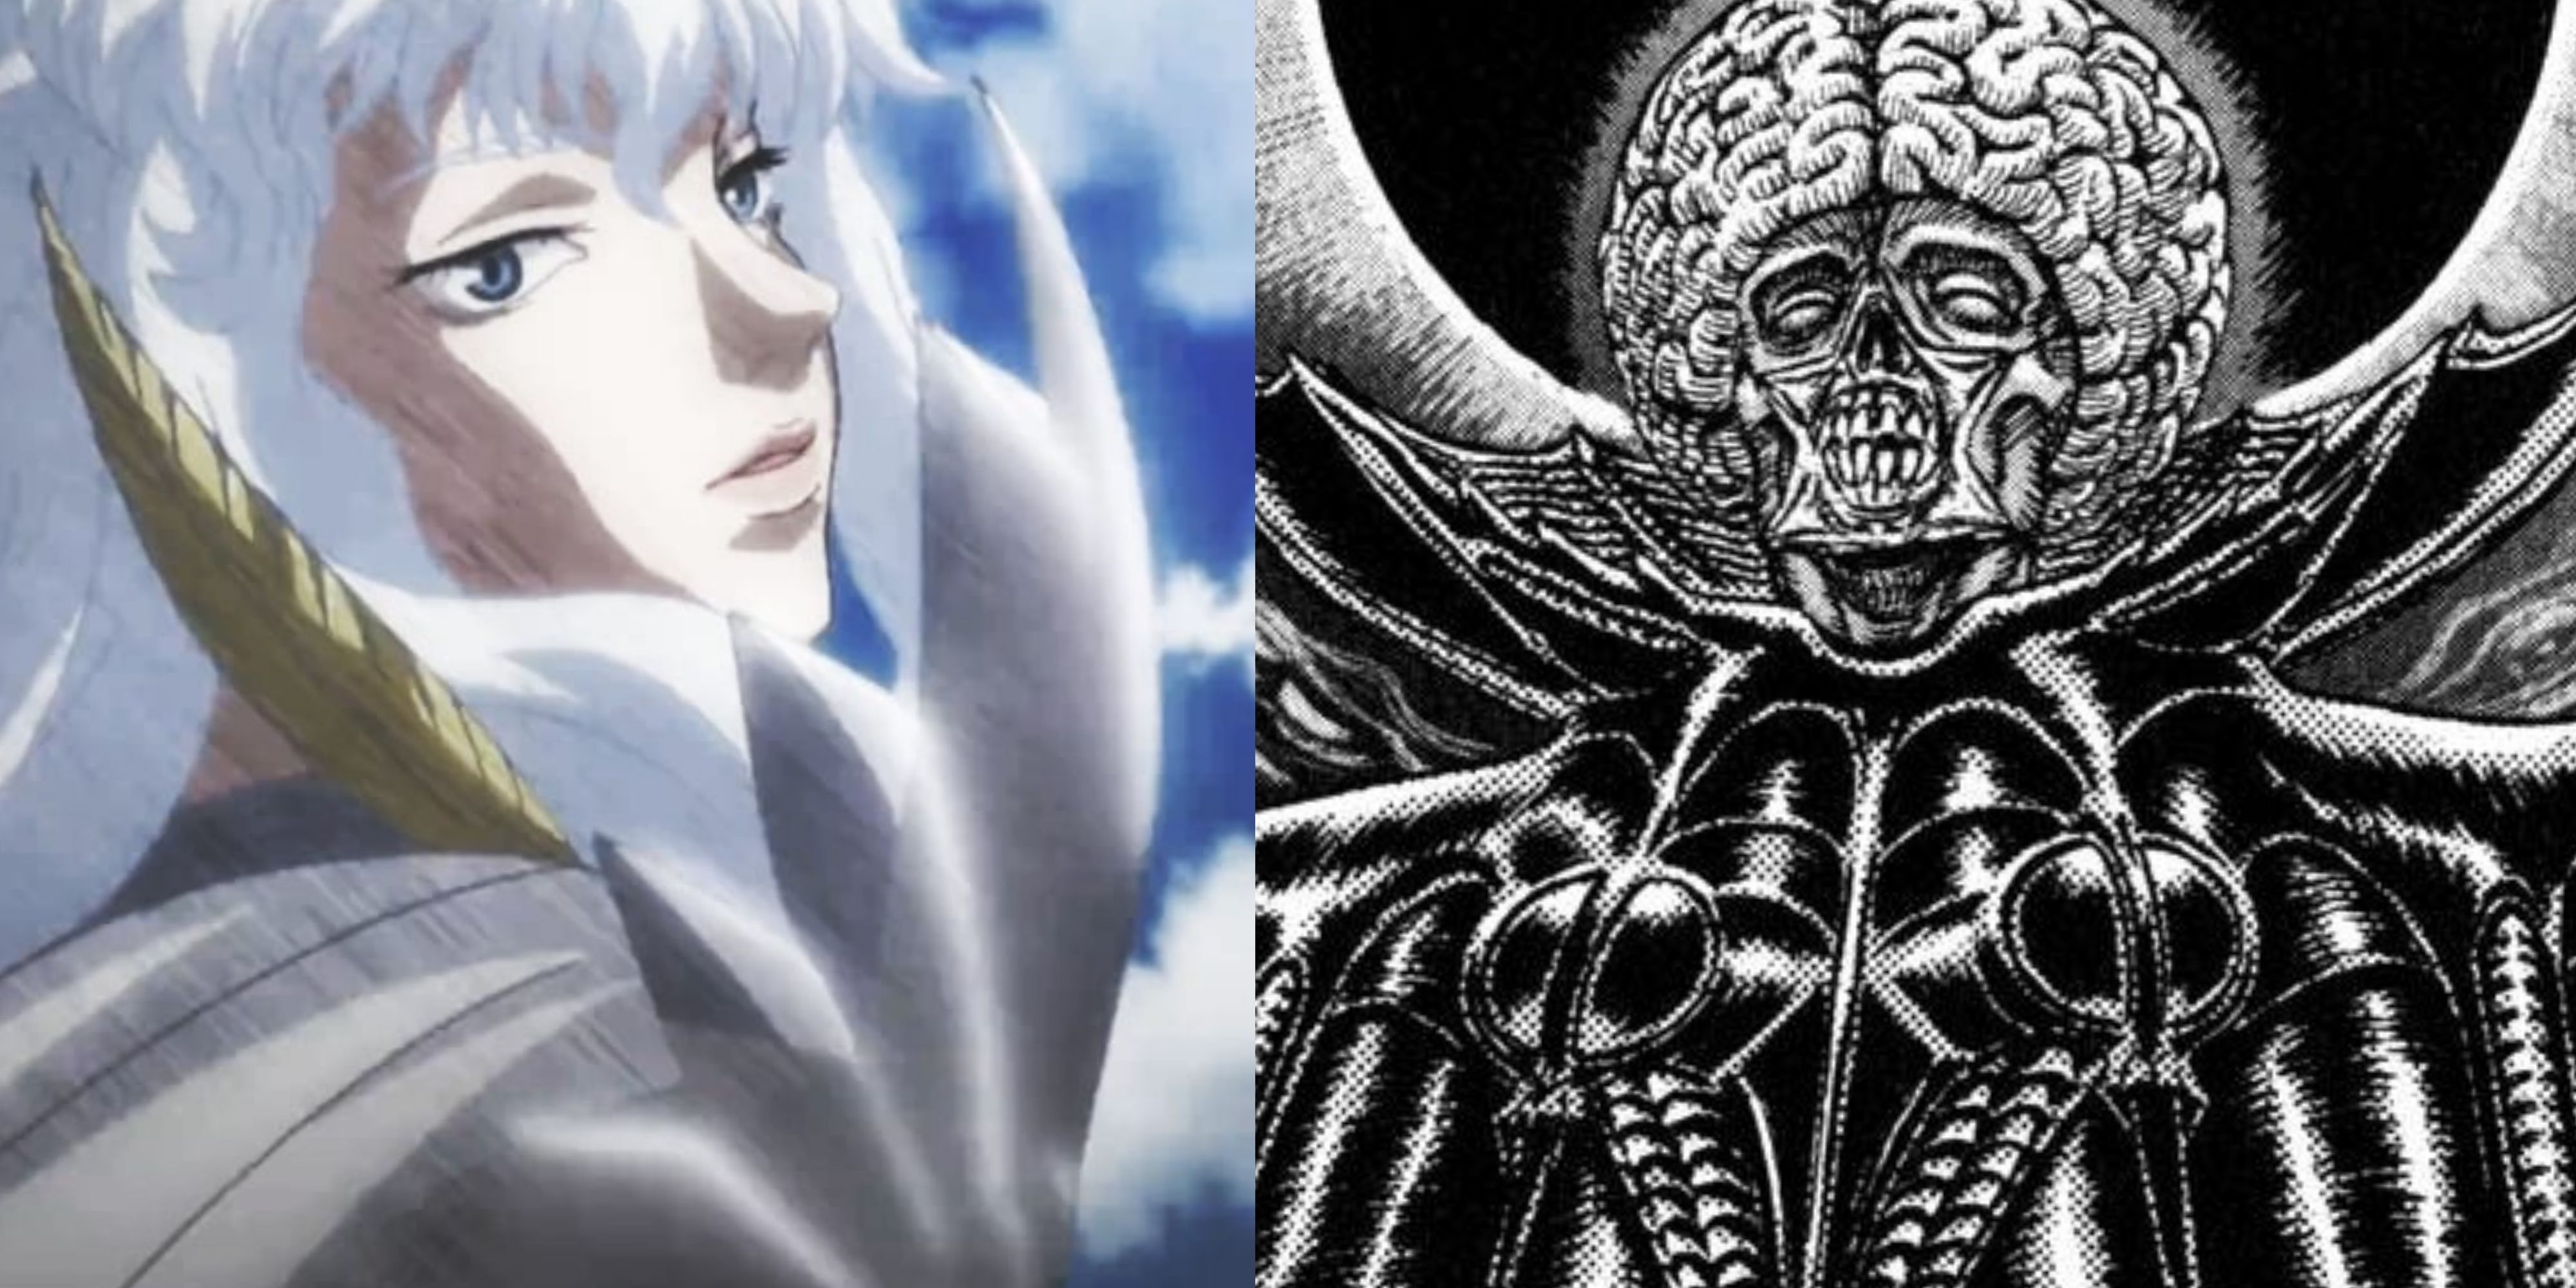 S] philosophy about the god hand. Do you think the god hand control the  universe? If so, why would griffith be so important? : r/Berserk